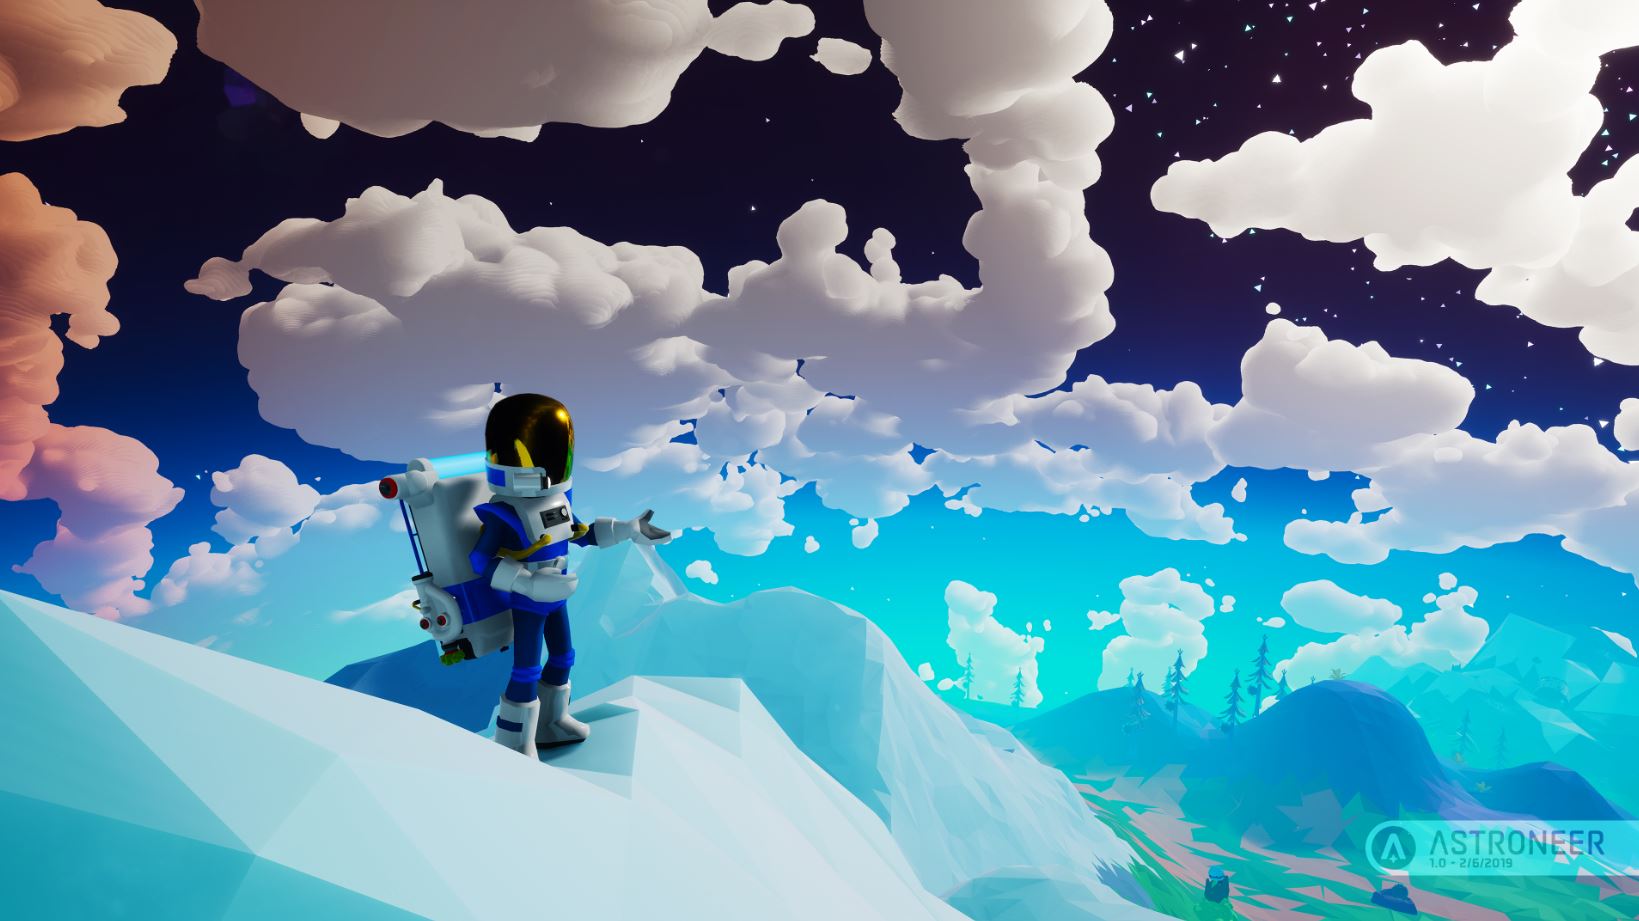 Astroneer terraforms Xbox One and PC platforms this February